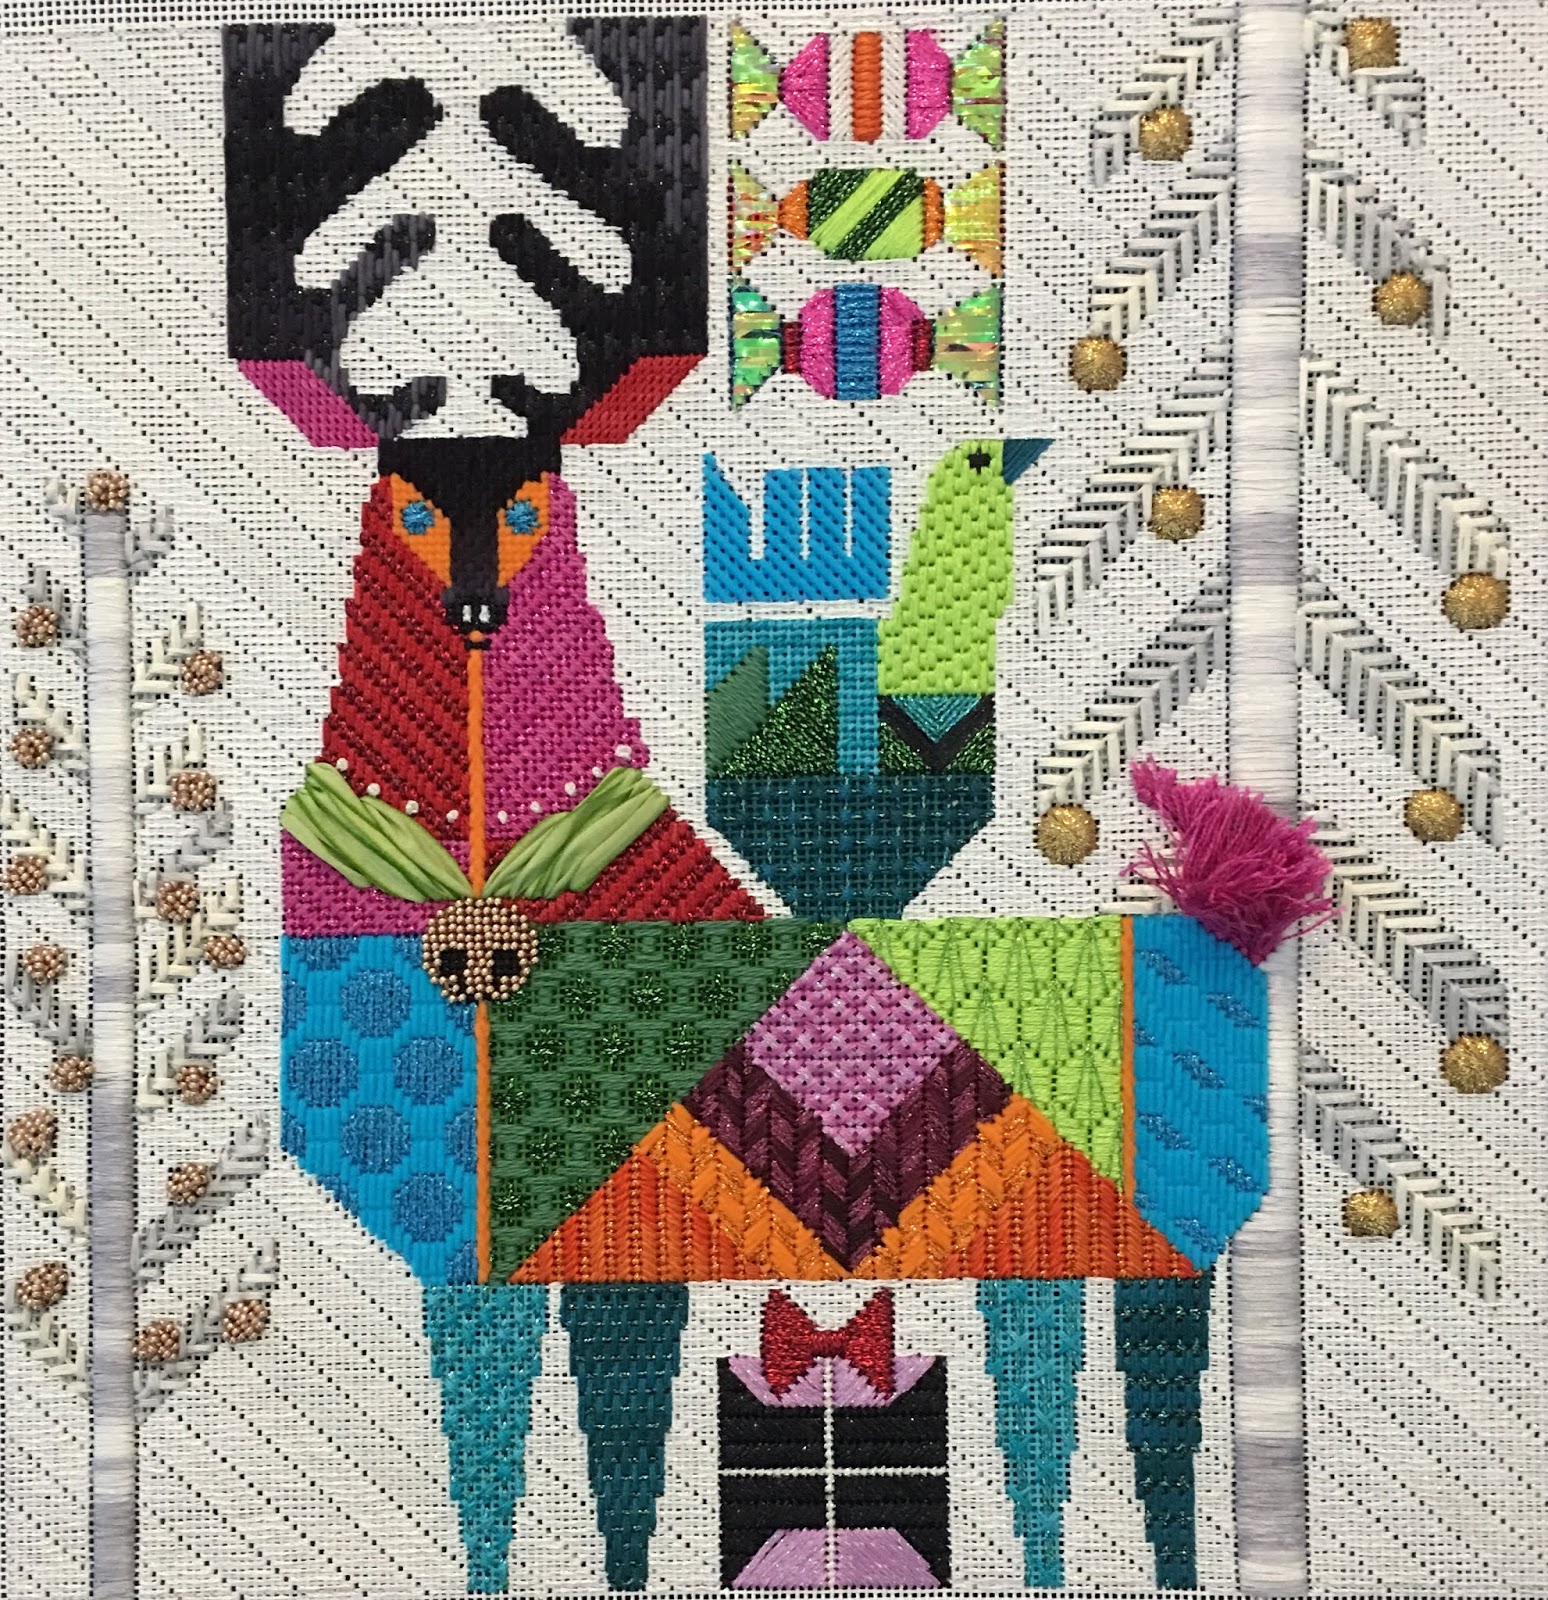 Needlepoint Social: Teaching Projects